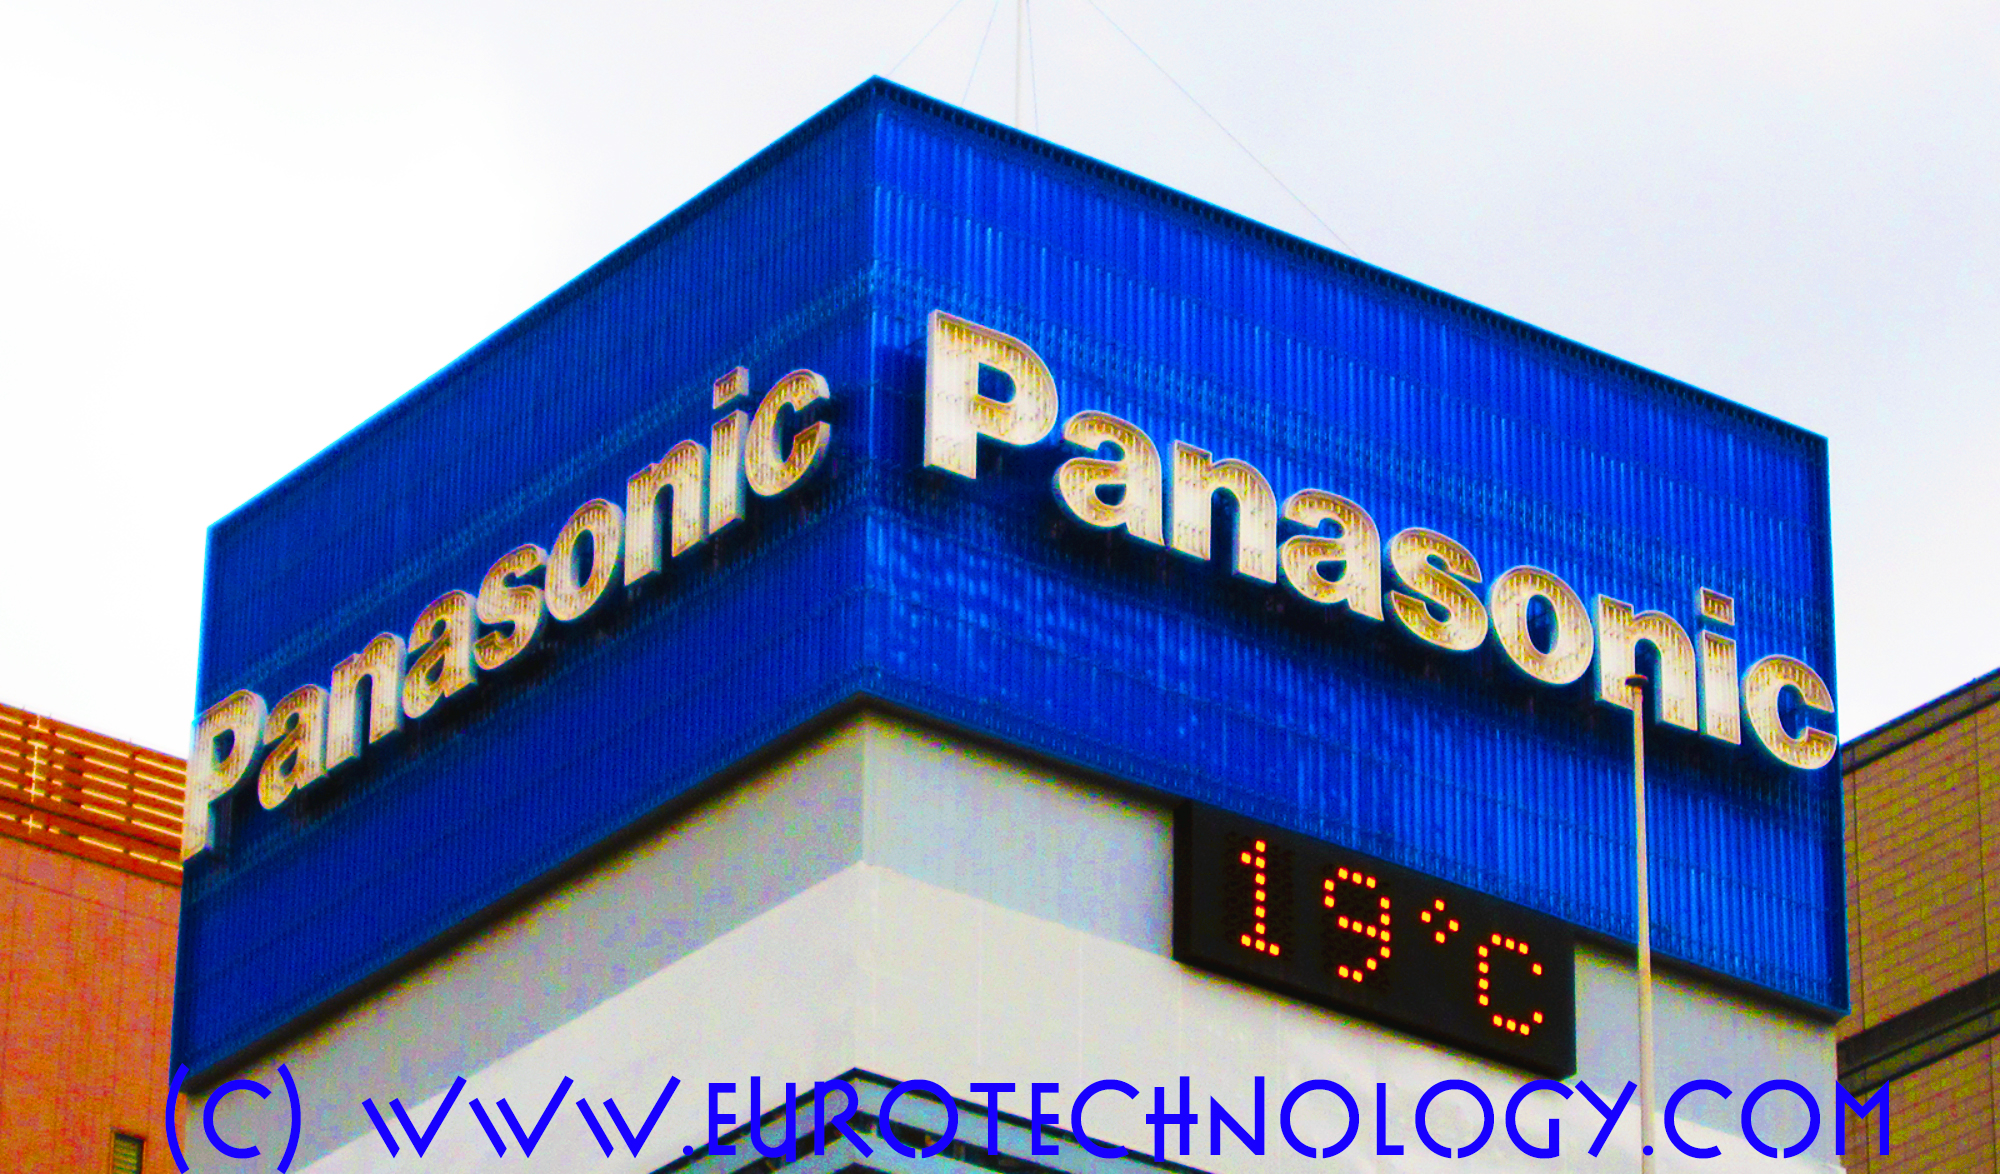 Nokia No. 1 in Japan! – Panasonic to sell mobile phone base station division to Nokia